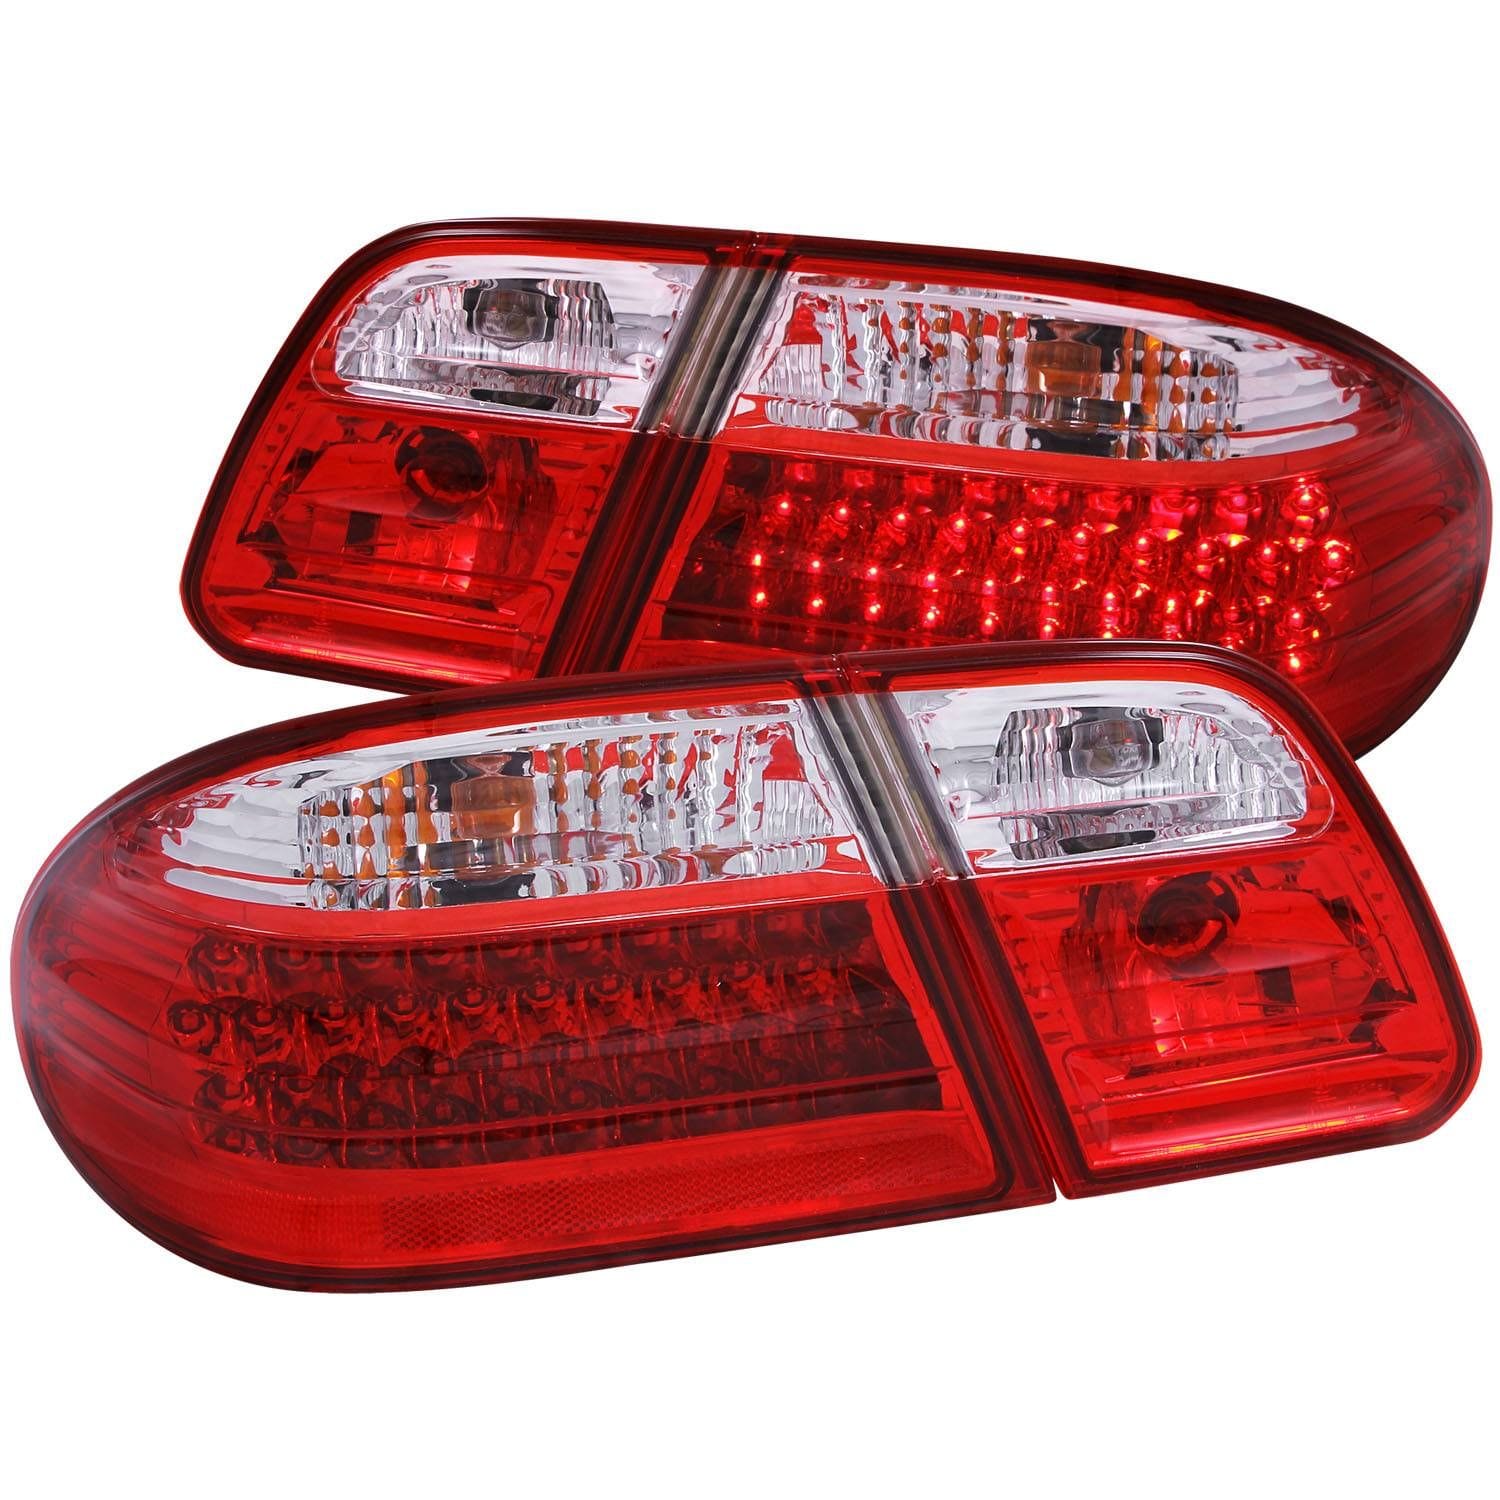 ANZO LED Taillights Red/Clear - Mercedes Benz / W210 / E Class